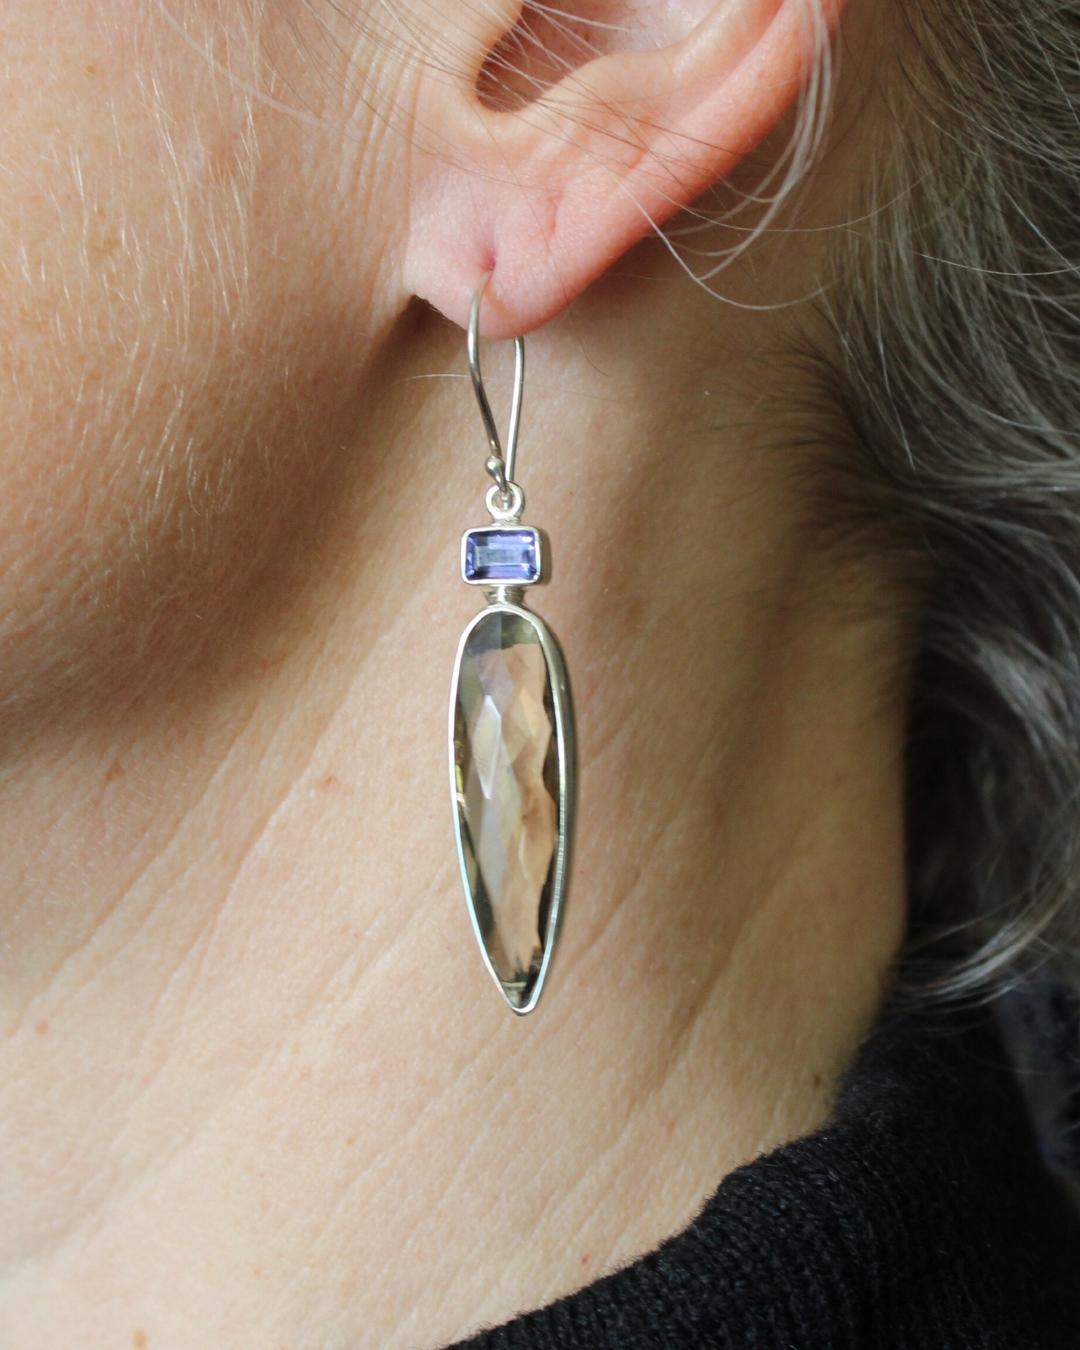 These elegant earrings feature teardrop faceted smoky quartz and emerald cut iolite set in sterling silver. The backs of the earrings are stamped with 925 and our name, Tika. We collaborate with a master silversmith in Java, in the heart of the